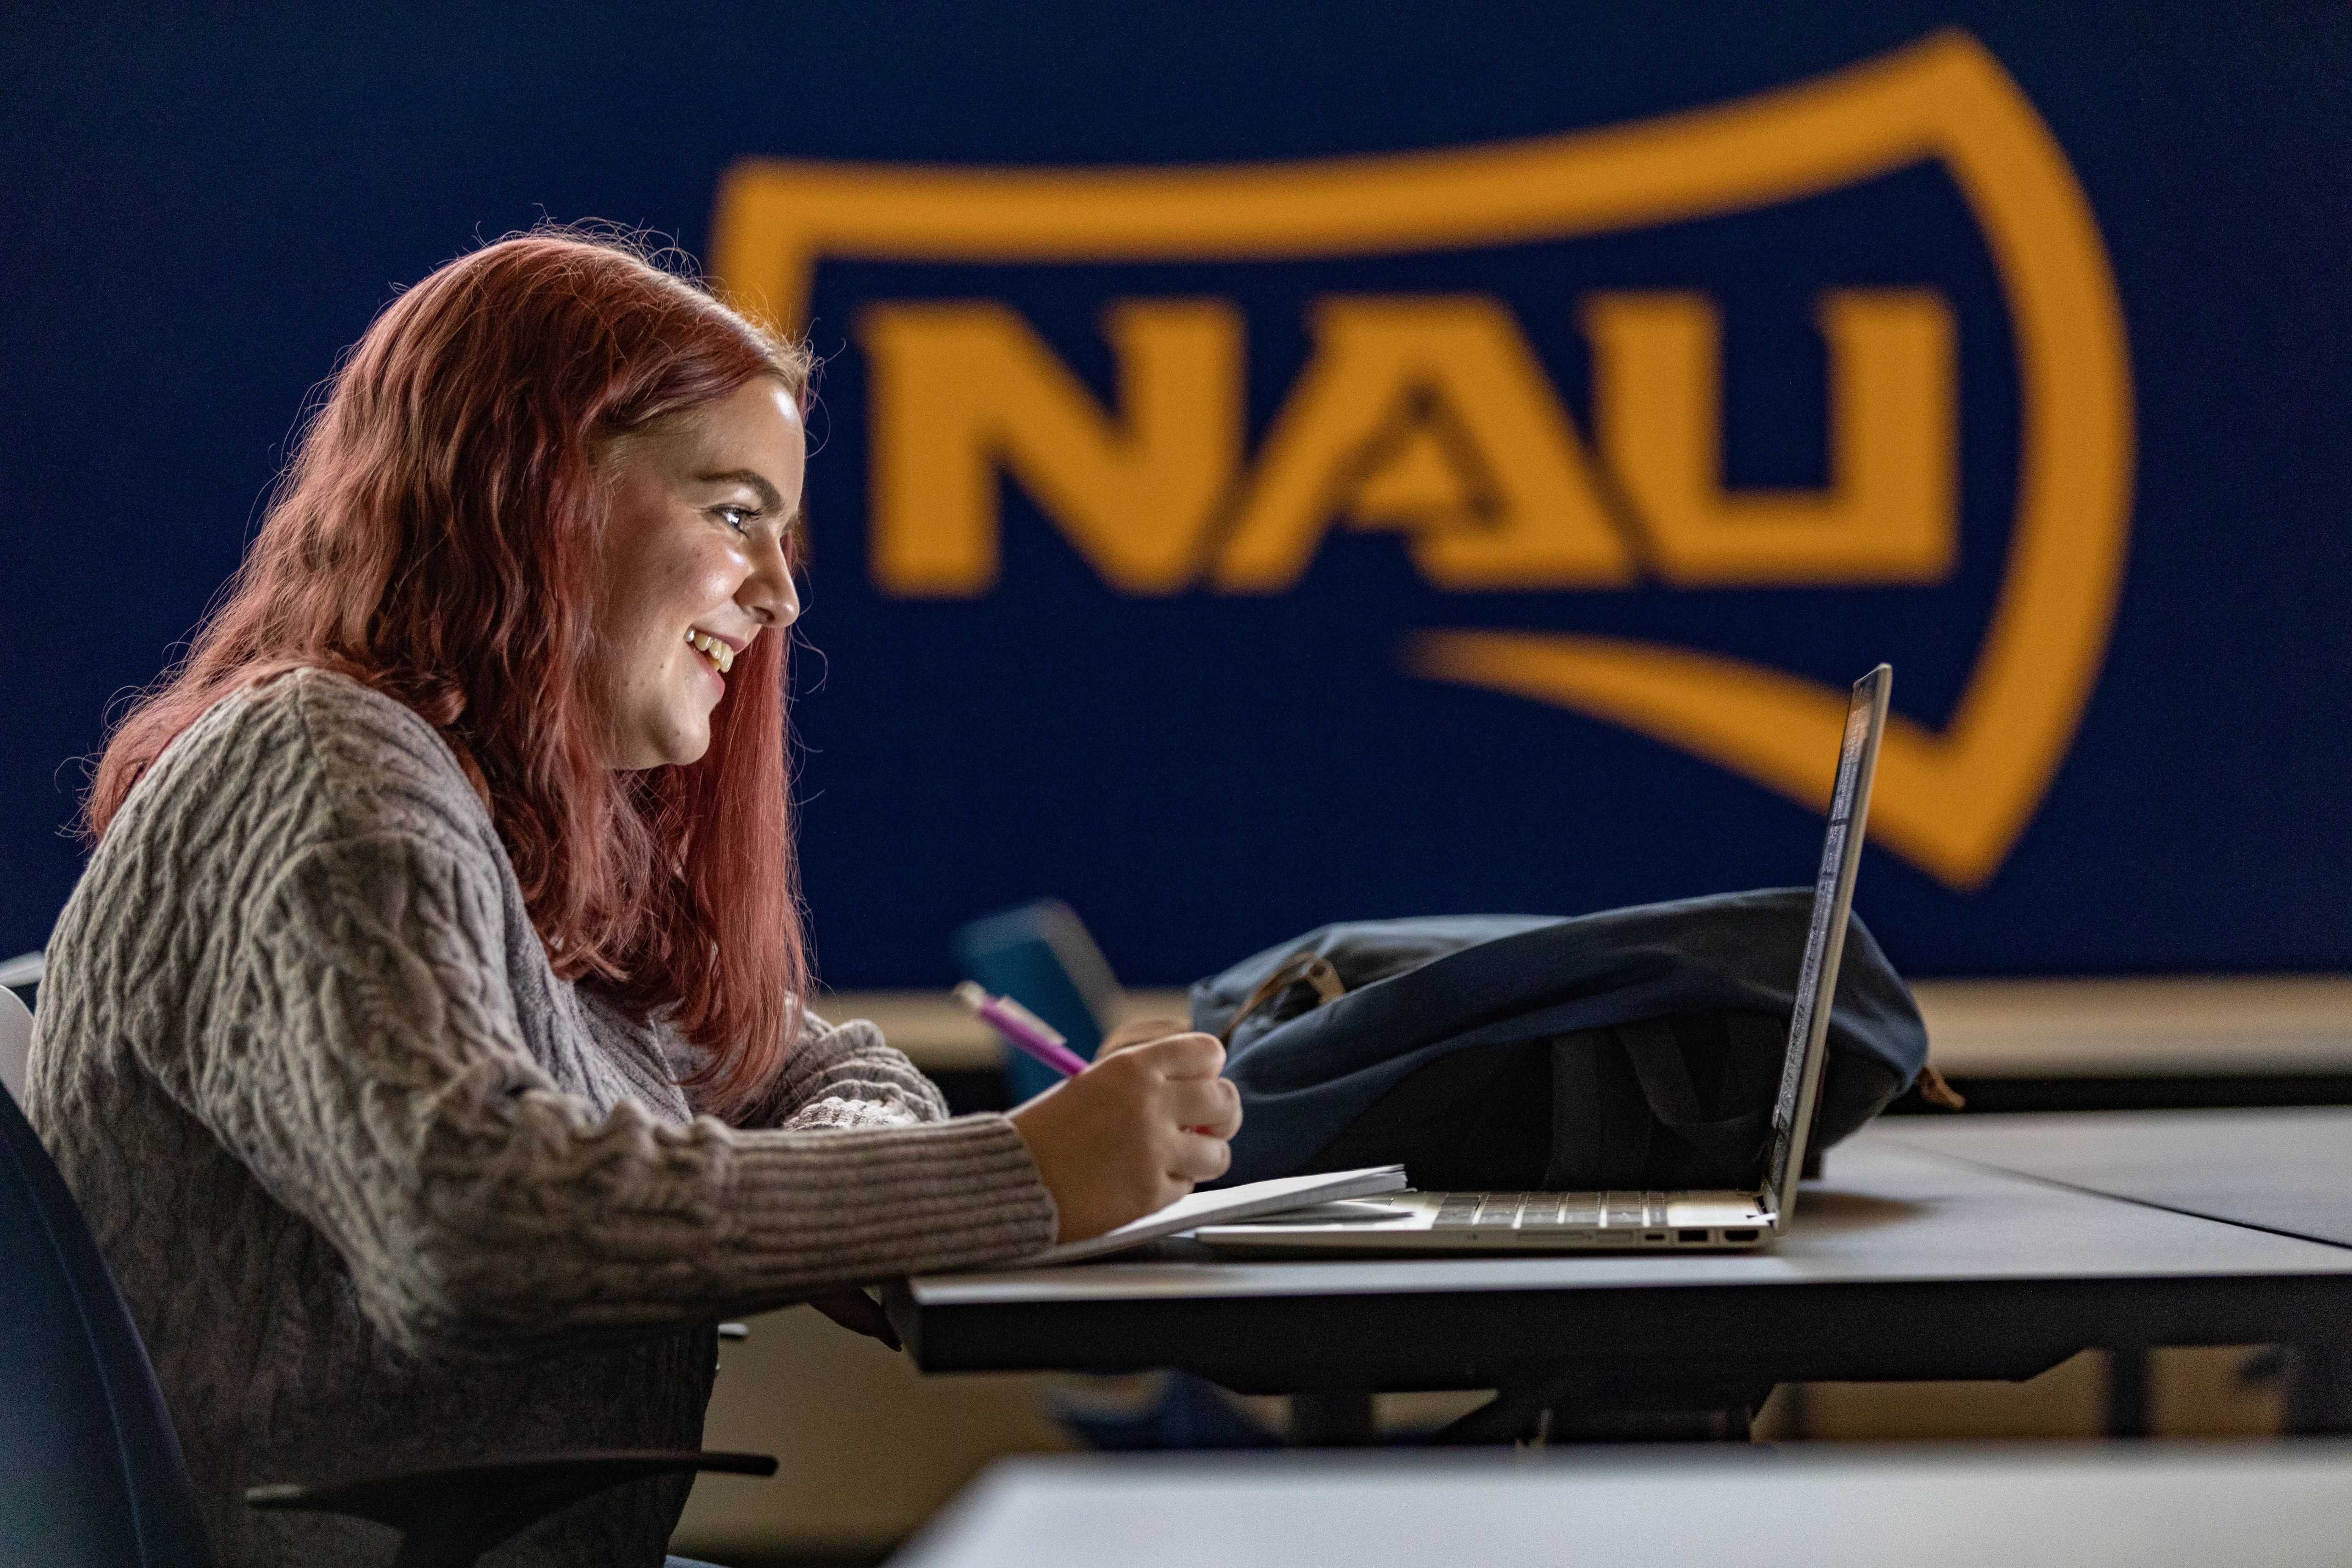 N A U student smiles while working on their laptop.